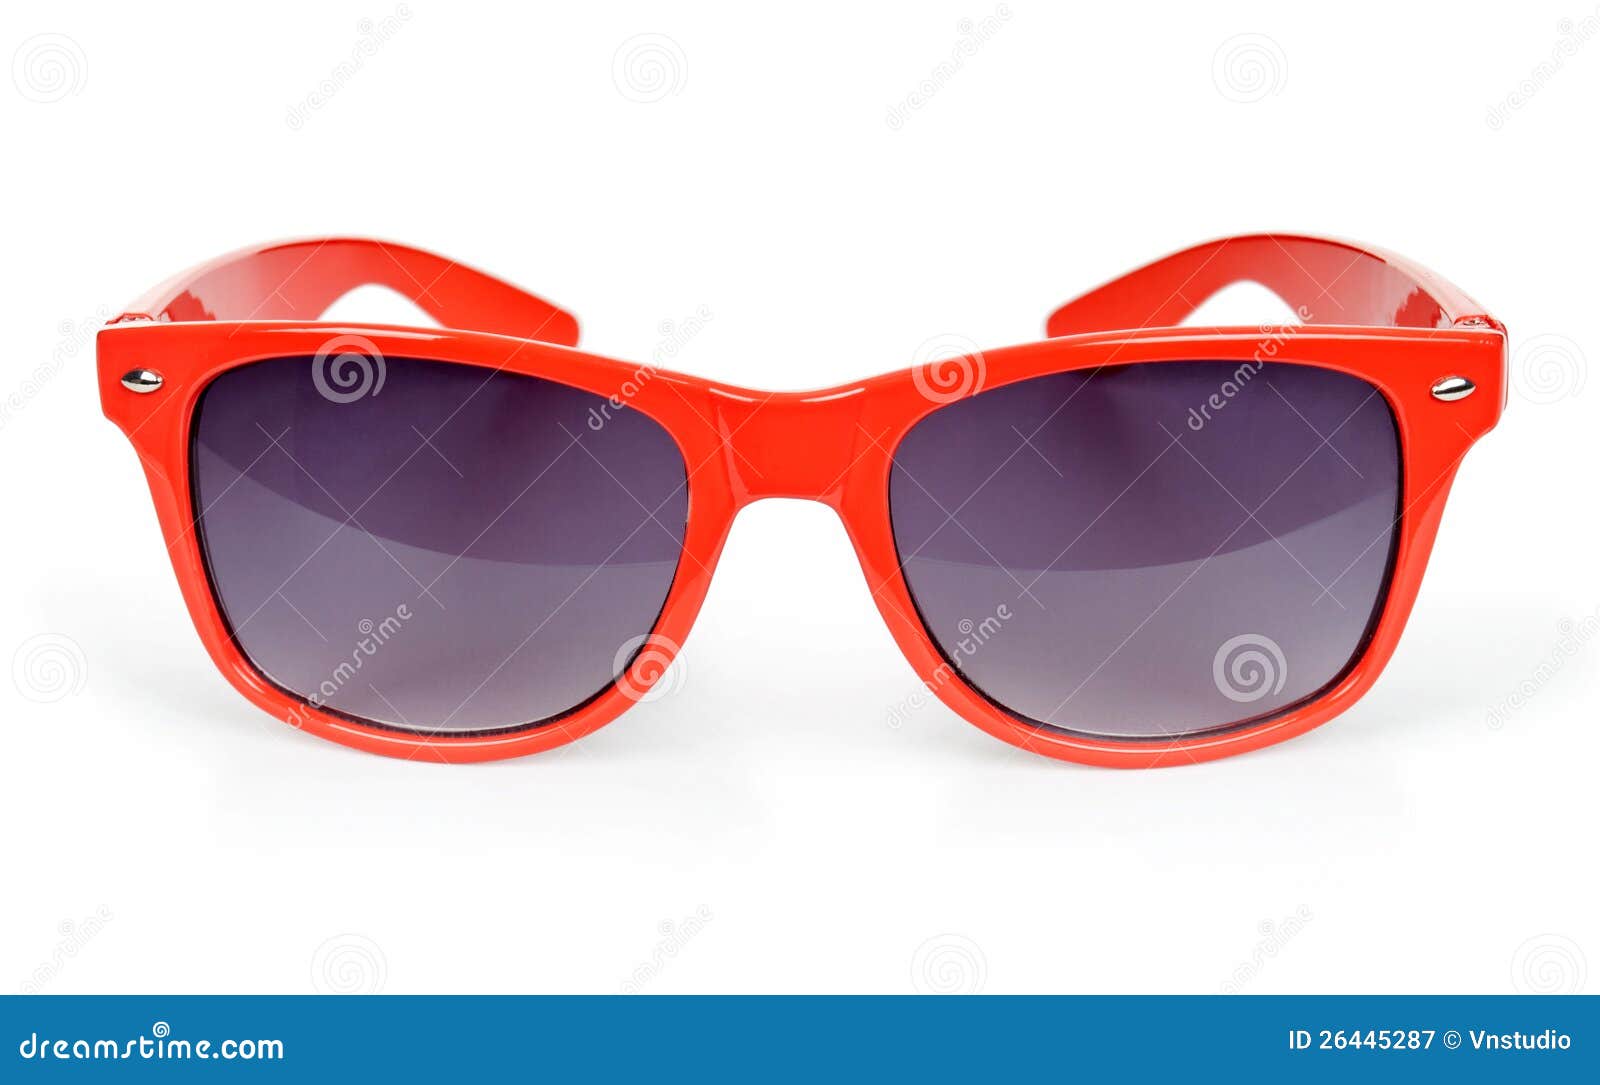 Women s red sunglasses stock image. Image of reflection - 26445287